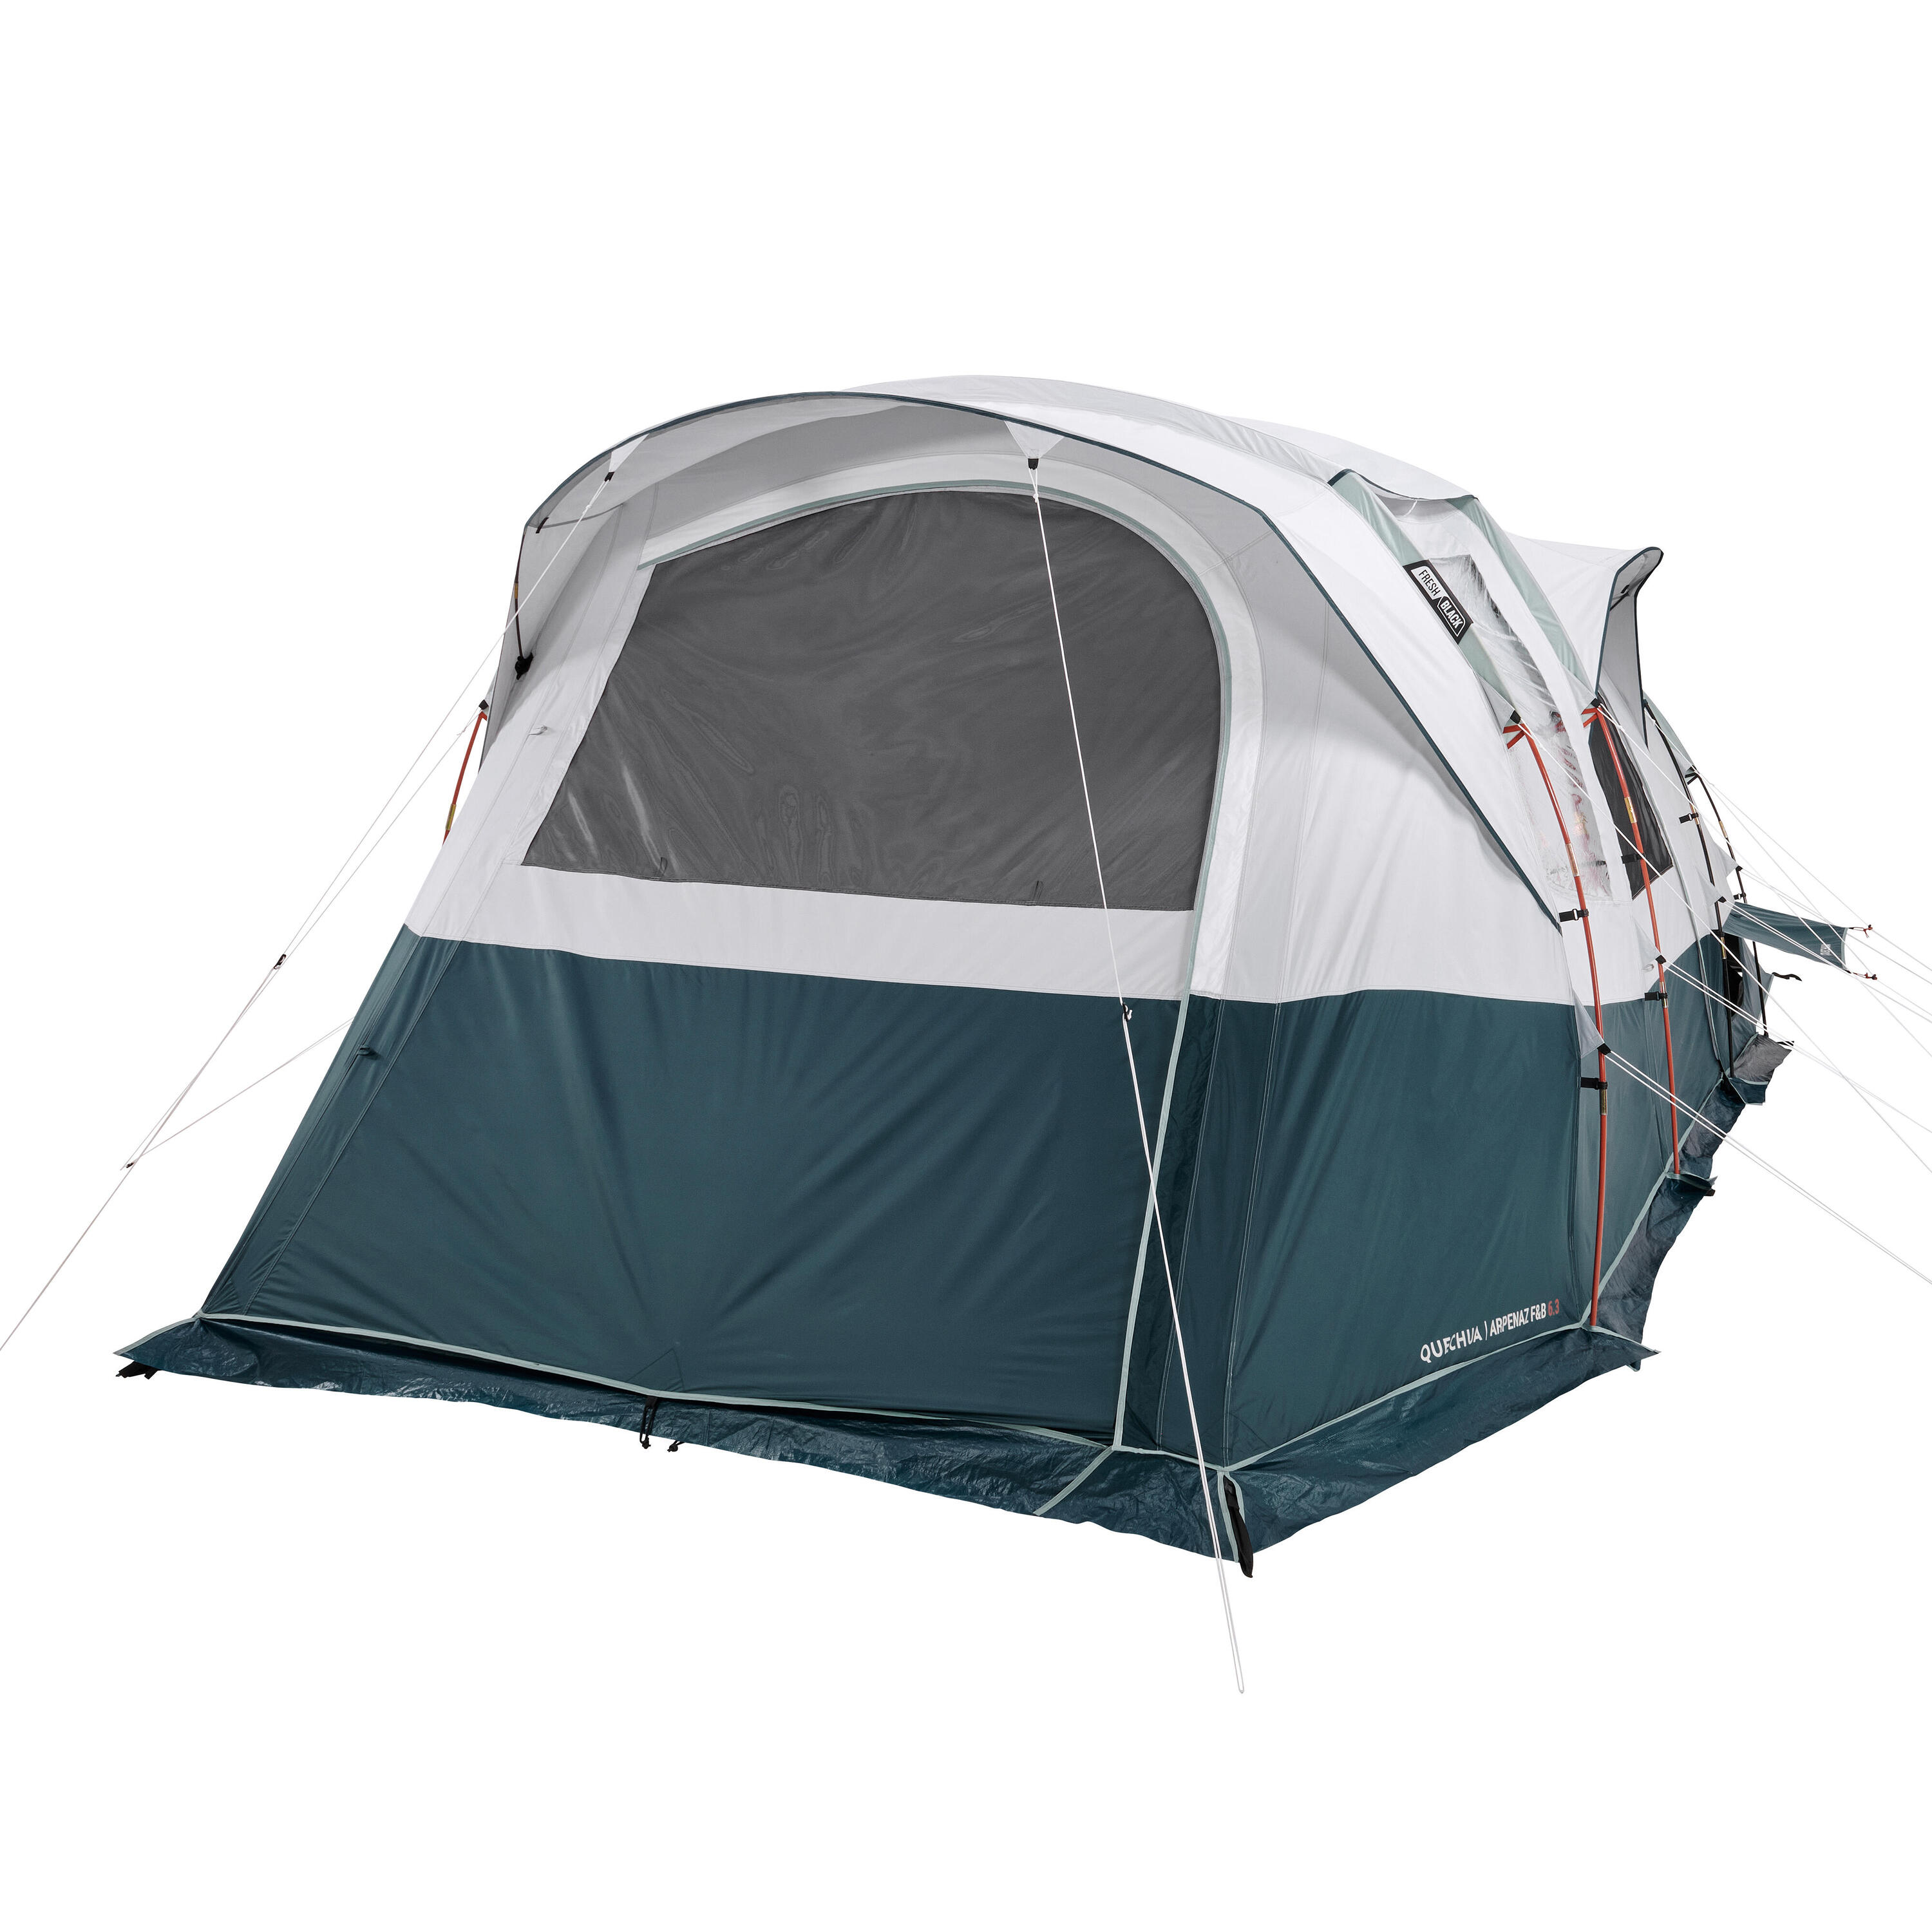 Camping tent with poles - Arpenaz 6.3 F&B - 6 Person - 3 Bedrooms 7/35